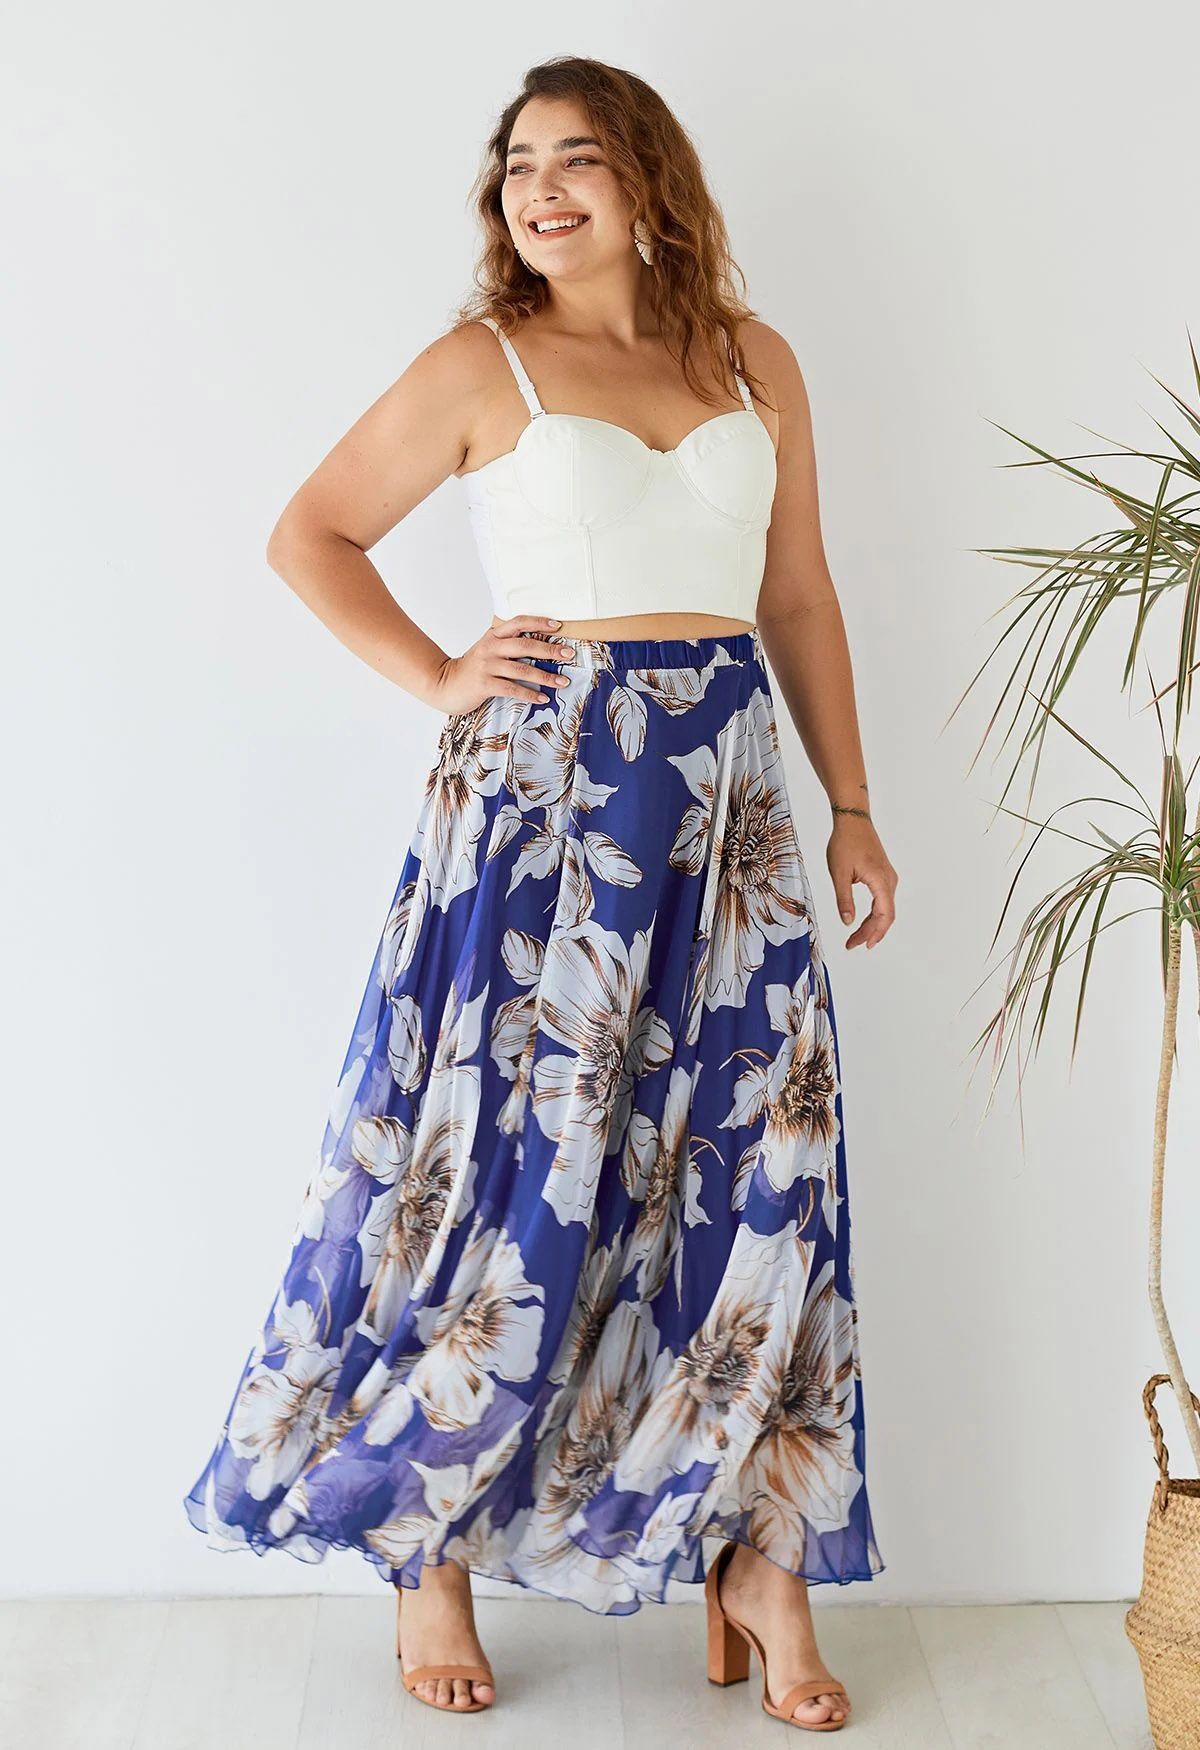 Marvelous Floral Maxi Skirt in Blue - Retro, Indie and Unique Fashion